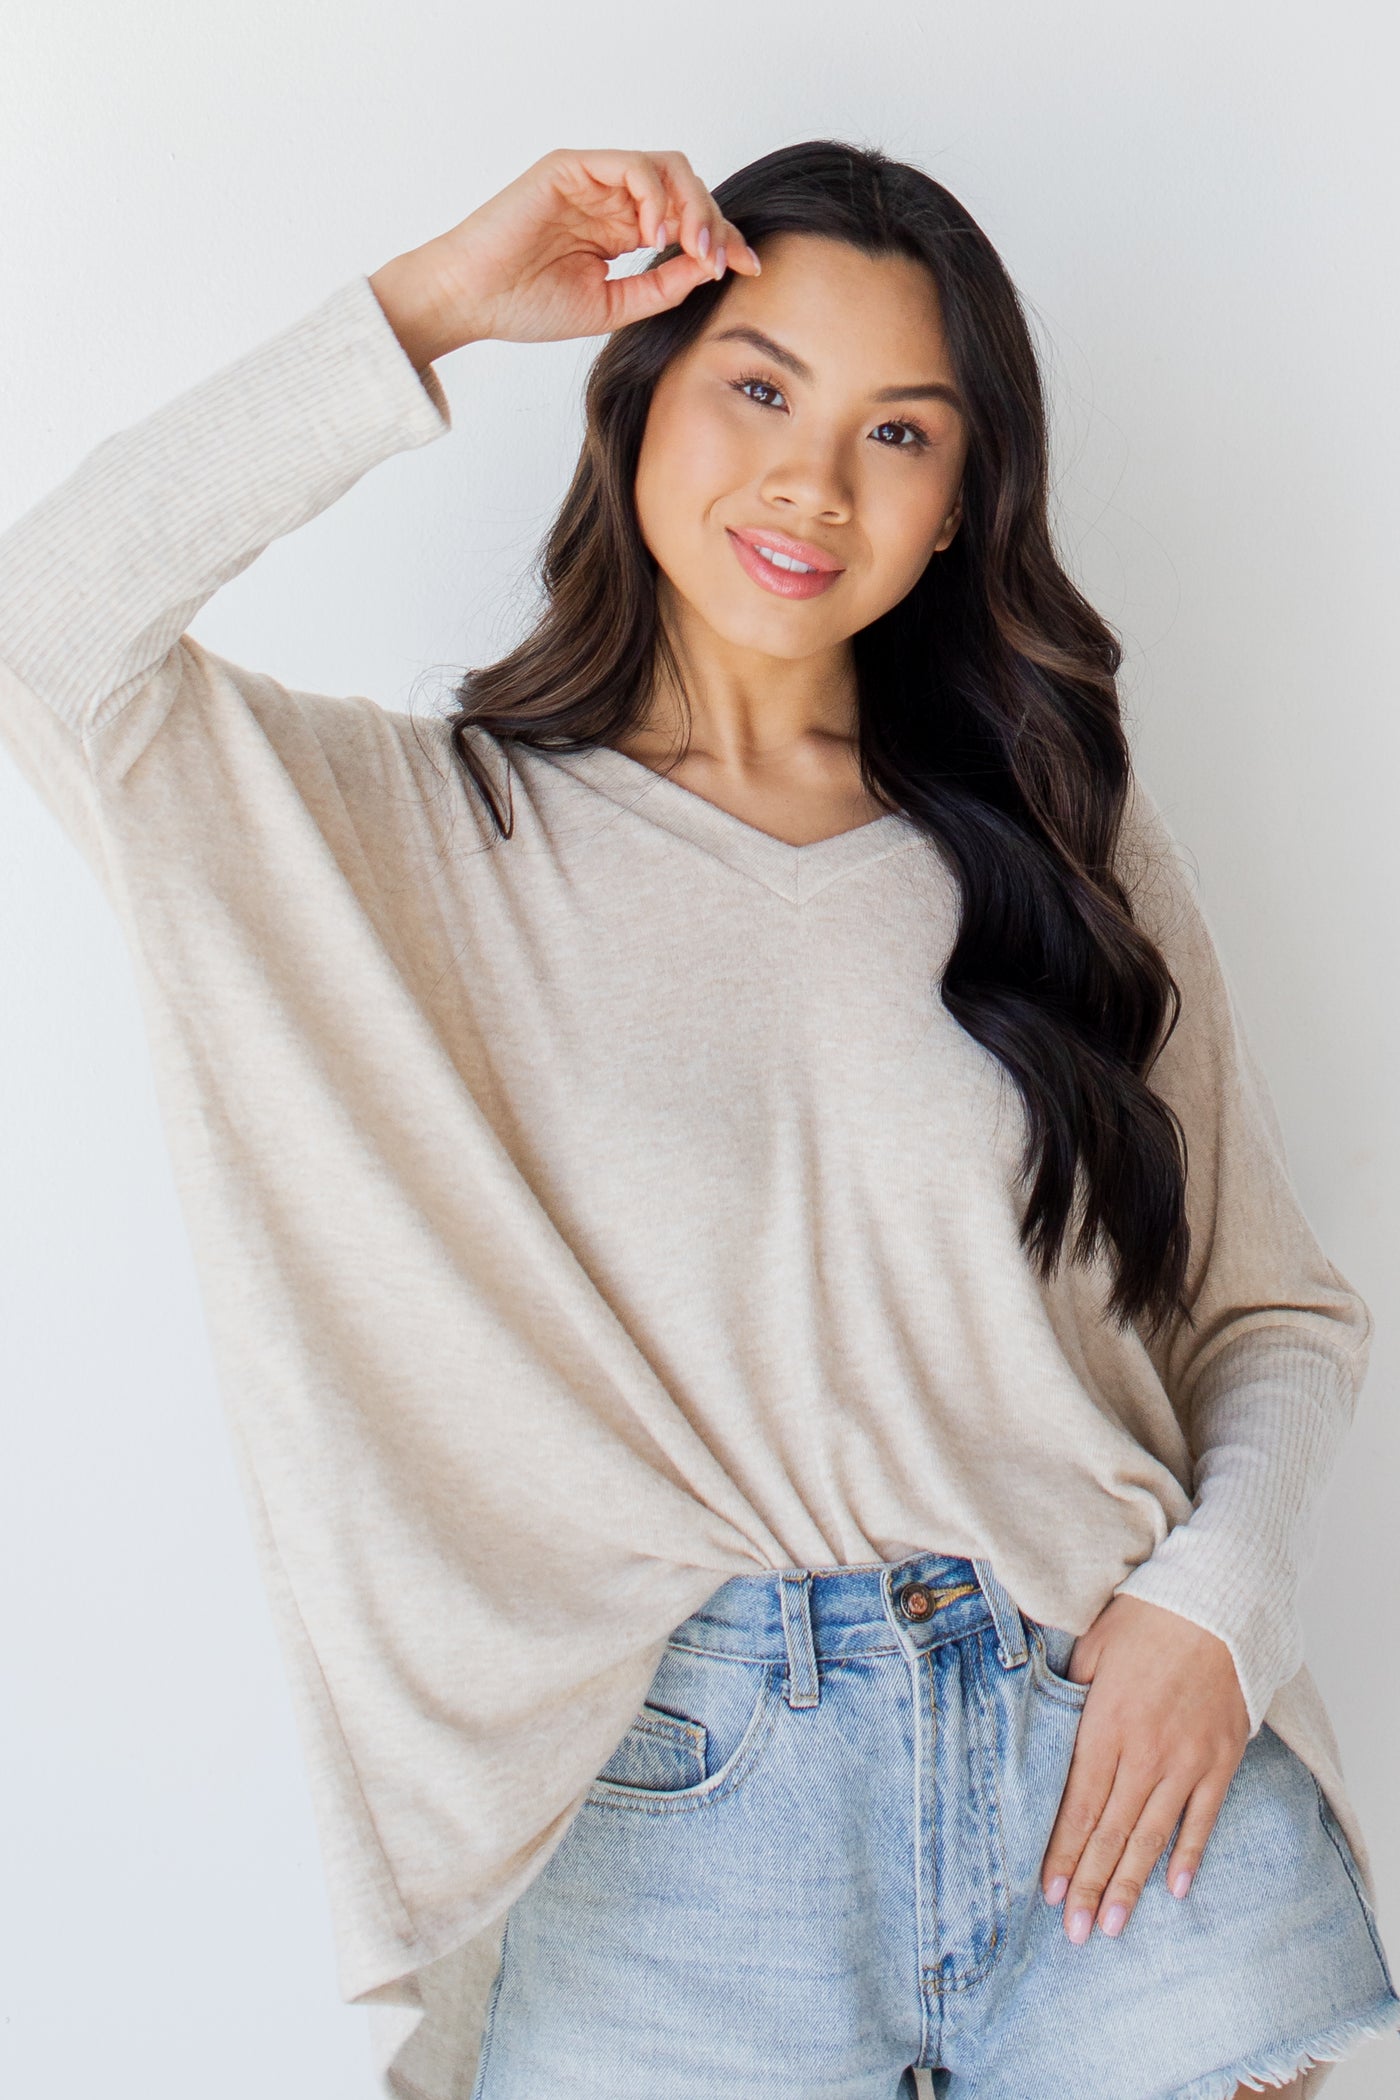 Brushed Knit Top in oatmeal